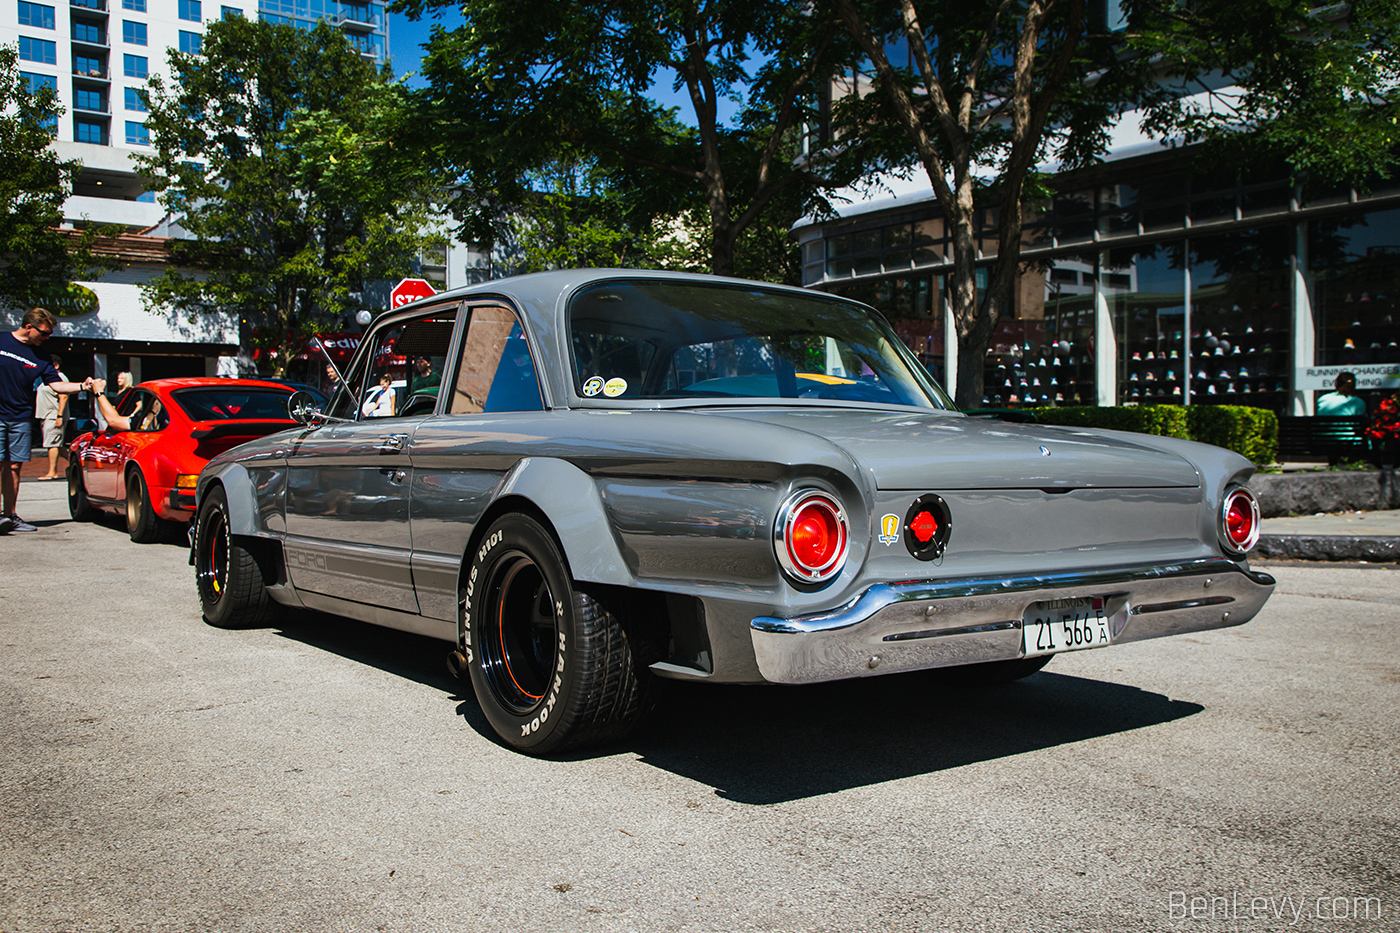 Customized Ford Falcon